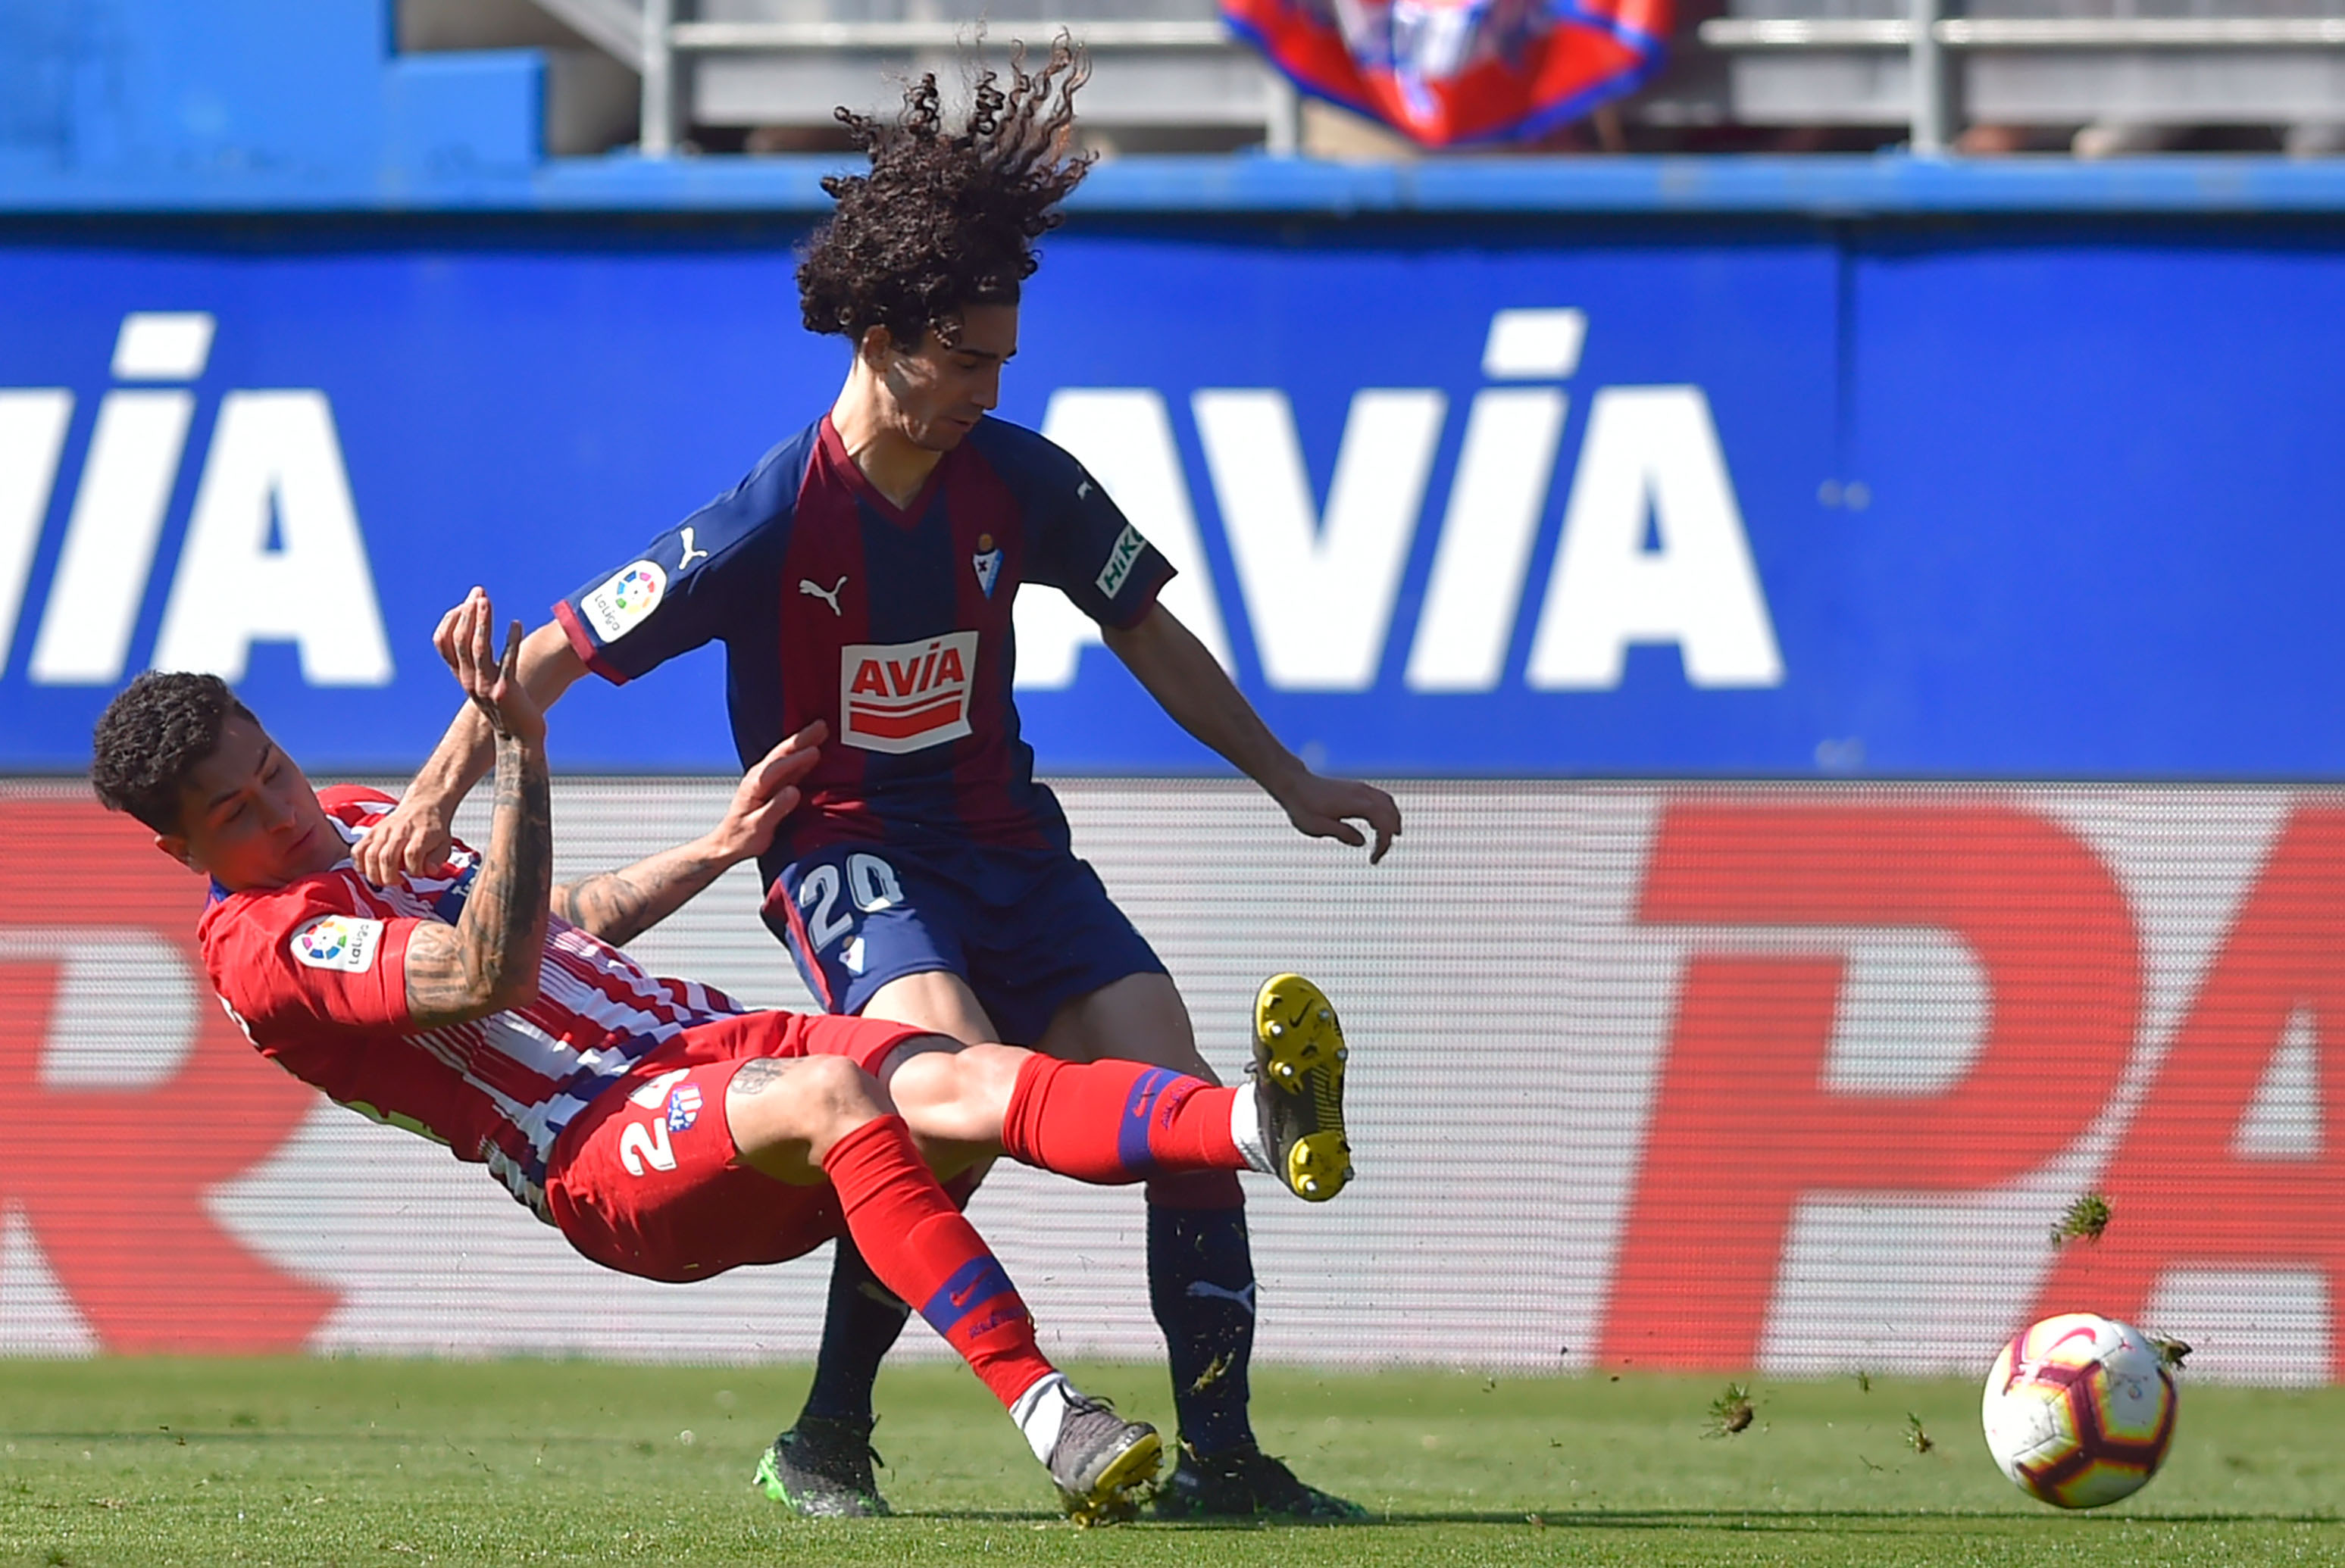 Atletico Madrid's Uruguayan defender Jose Maria Gimenez (L) vies with Eibar's Spanish defender Marc Cucurella during the Spanish league football match between SD Eibar and Club Atletico de Madrid at the Ipurua stadium in Eibar on April 20, 2019. (Photo by ANDER GILLENEA / AFP)        (Photo credit should read ANDER GILLENEA/AFP/Getty Images)